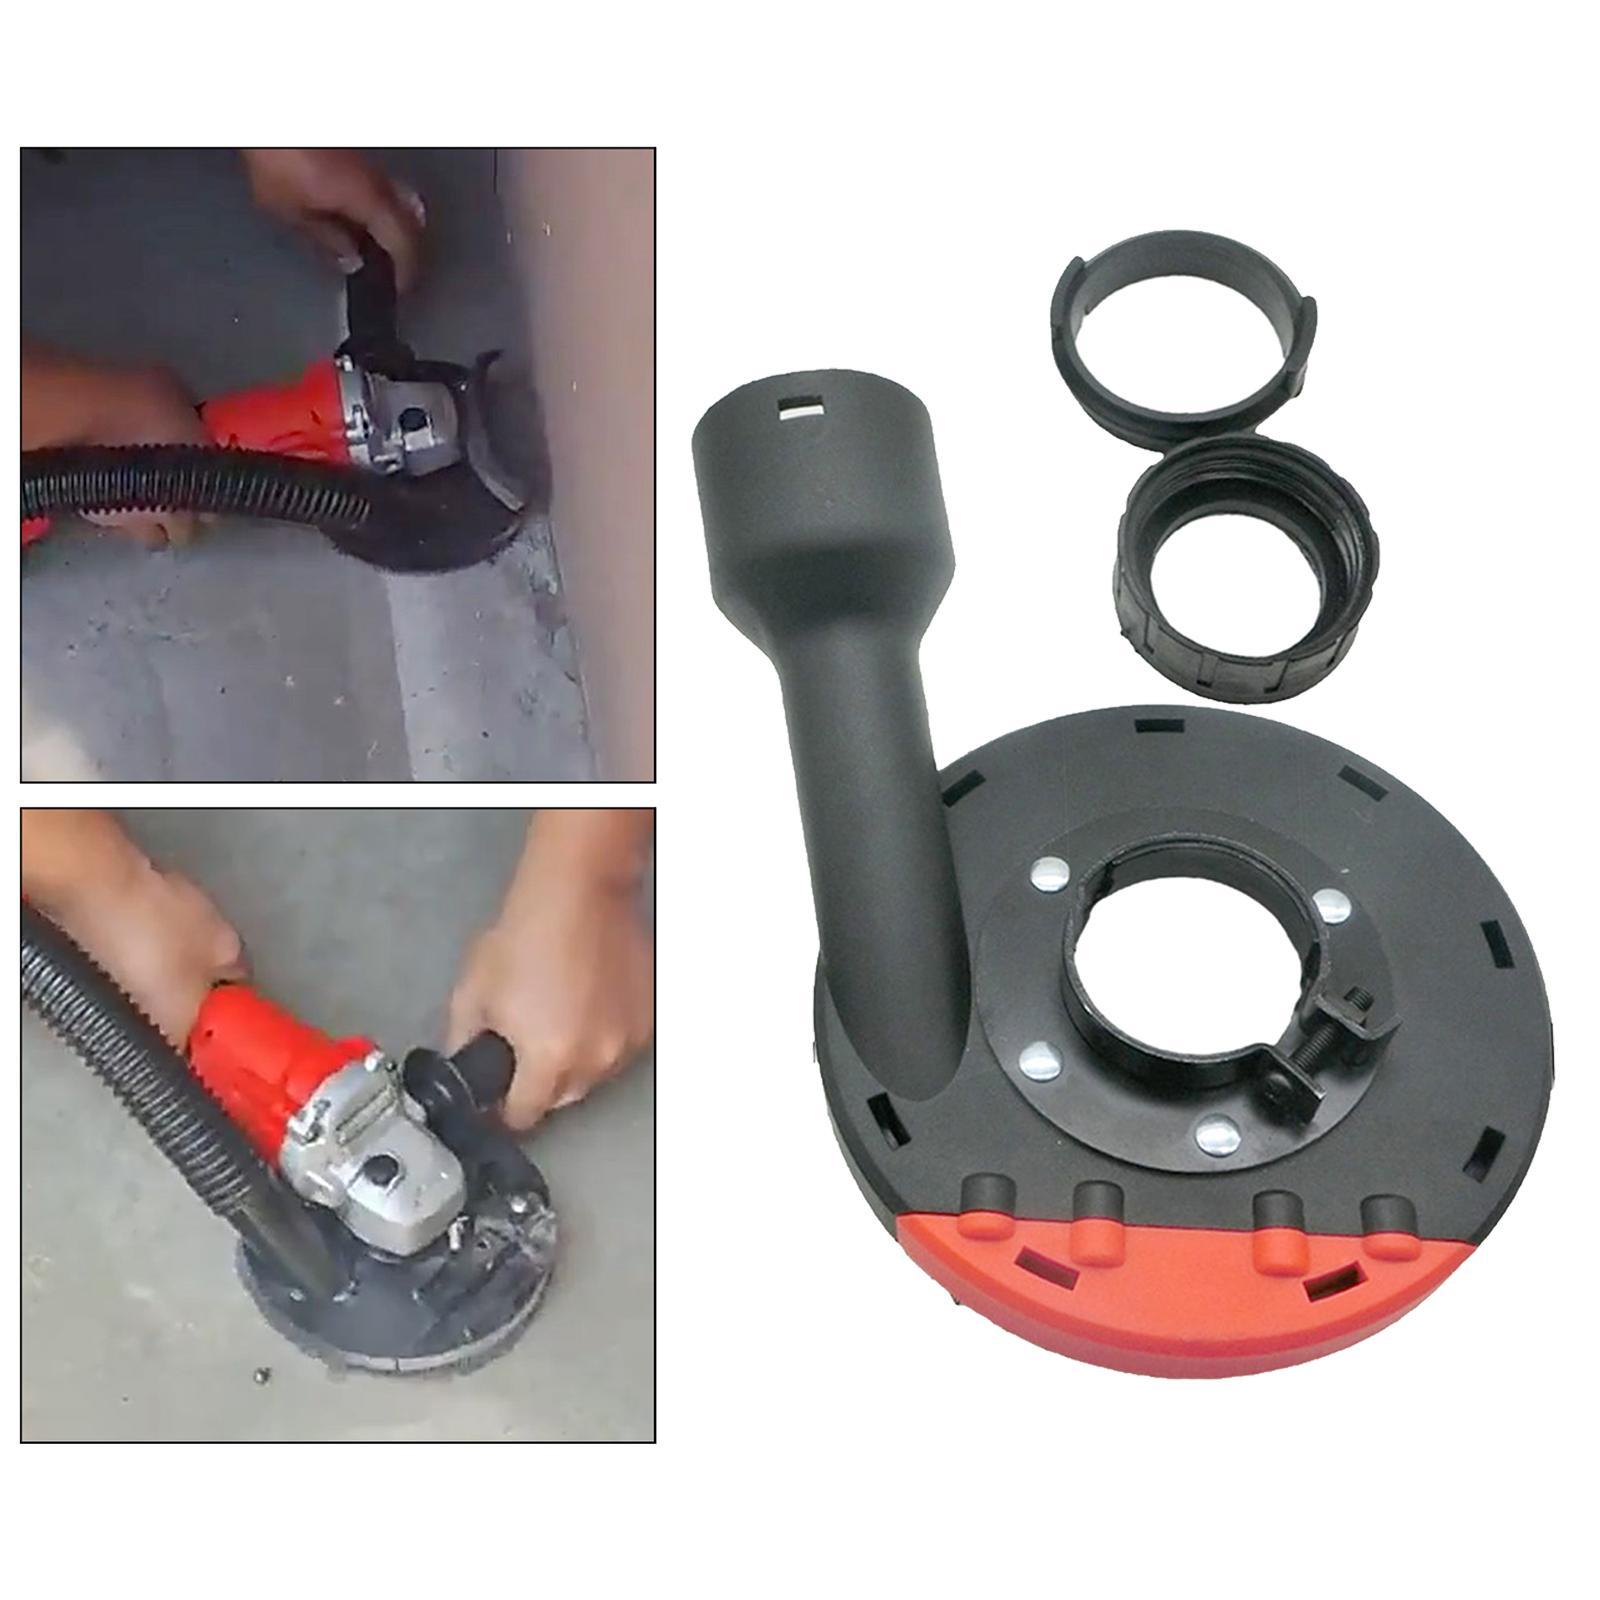 Surface Grinding Dust Shroud for Angle Grinder, Universal 5.5Inch/140mm